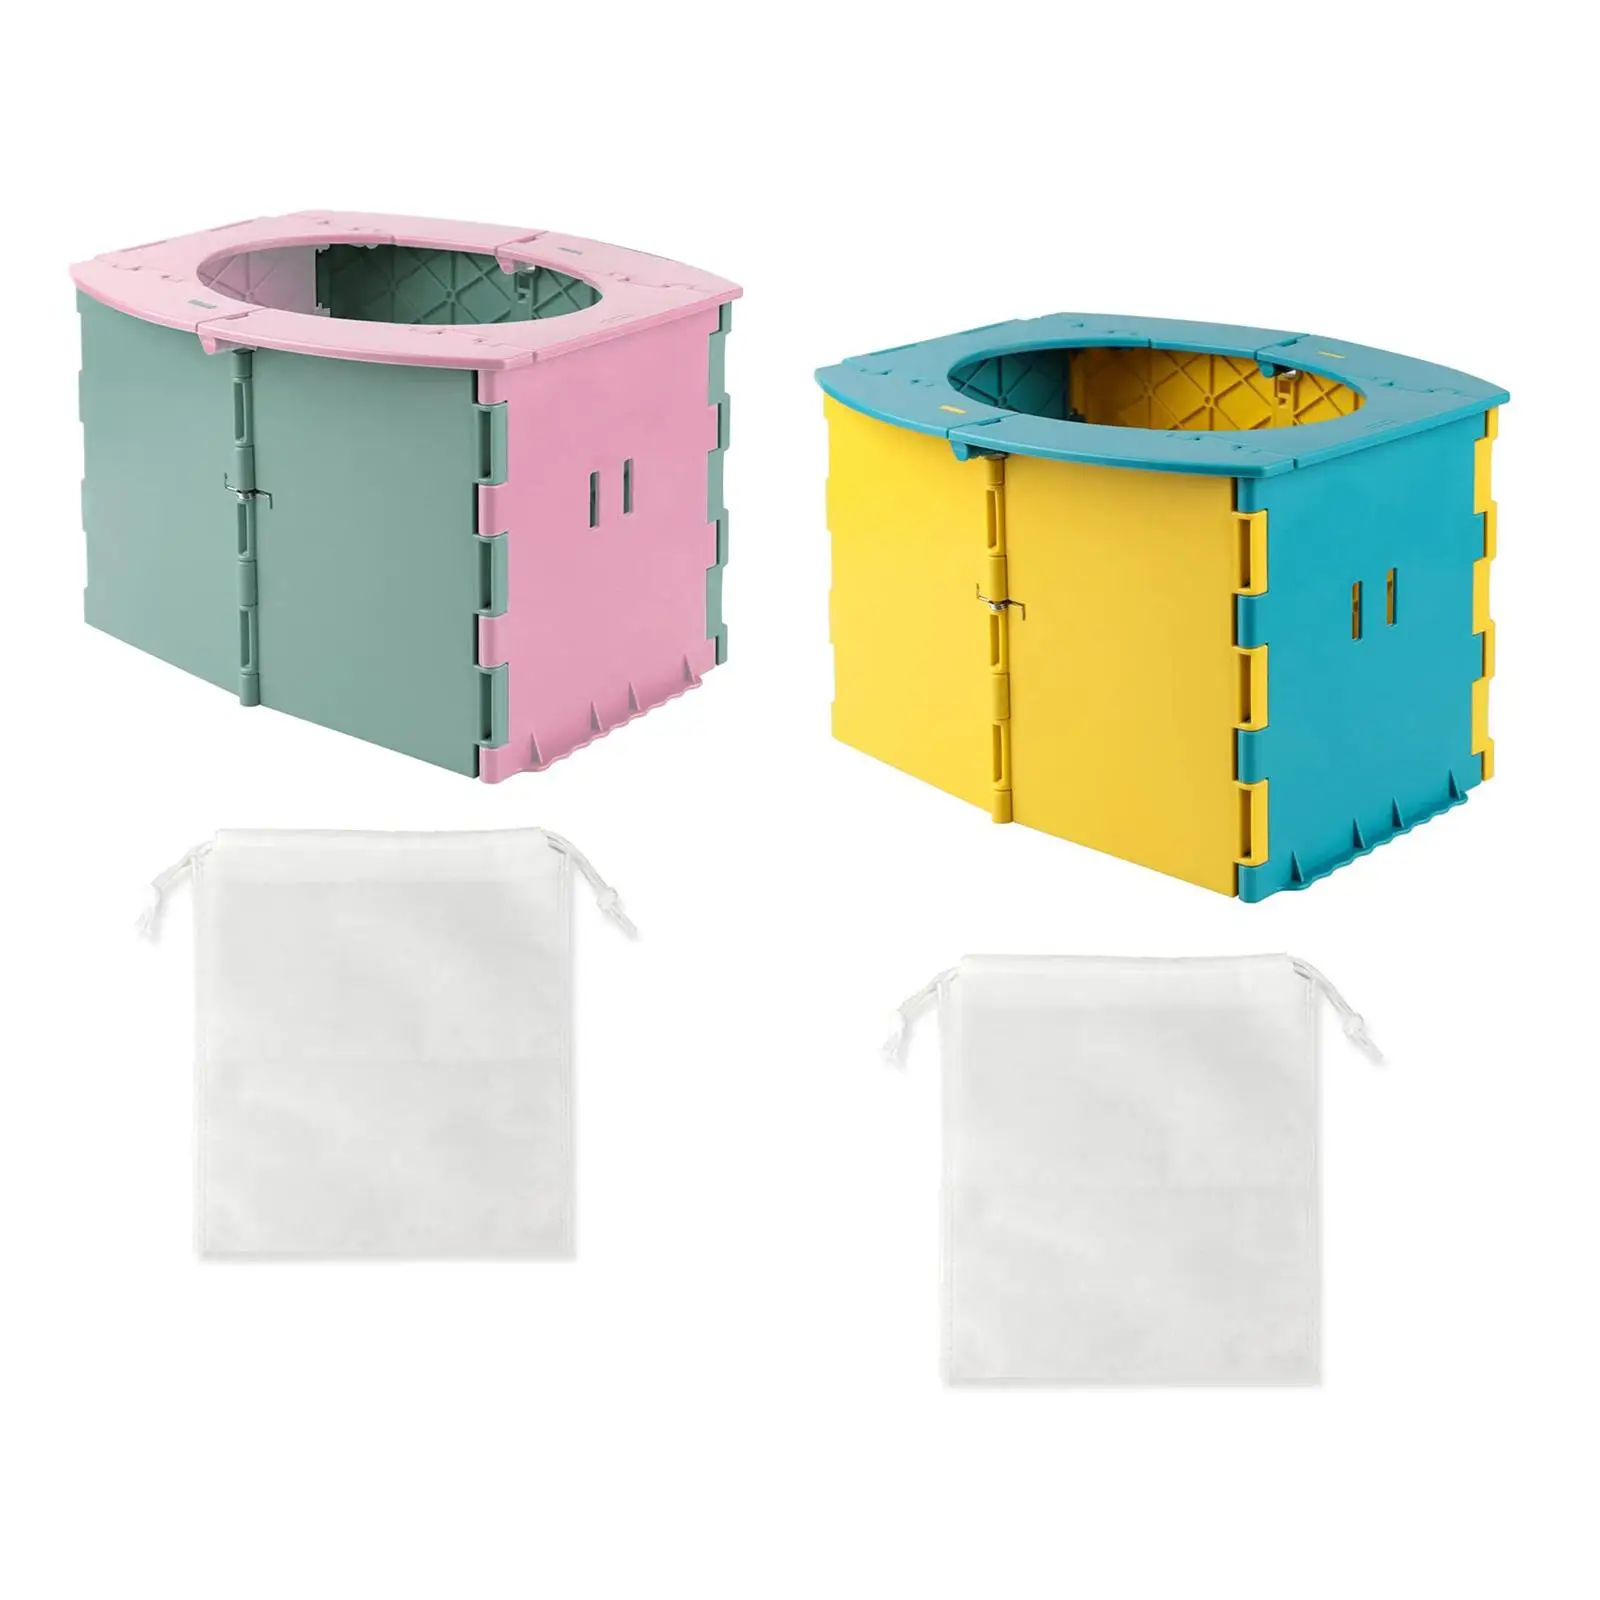 Lightweight Travel Toilet Potty Chair Car Toilet Portable Folding Toilet Camping Toilet for Outdoor Boat Trip Camping